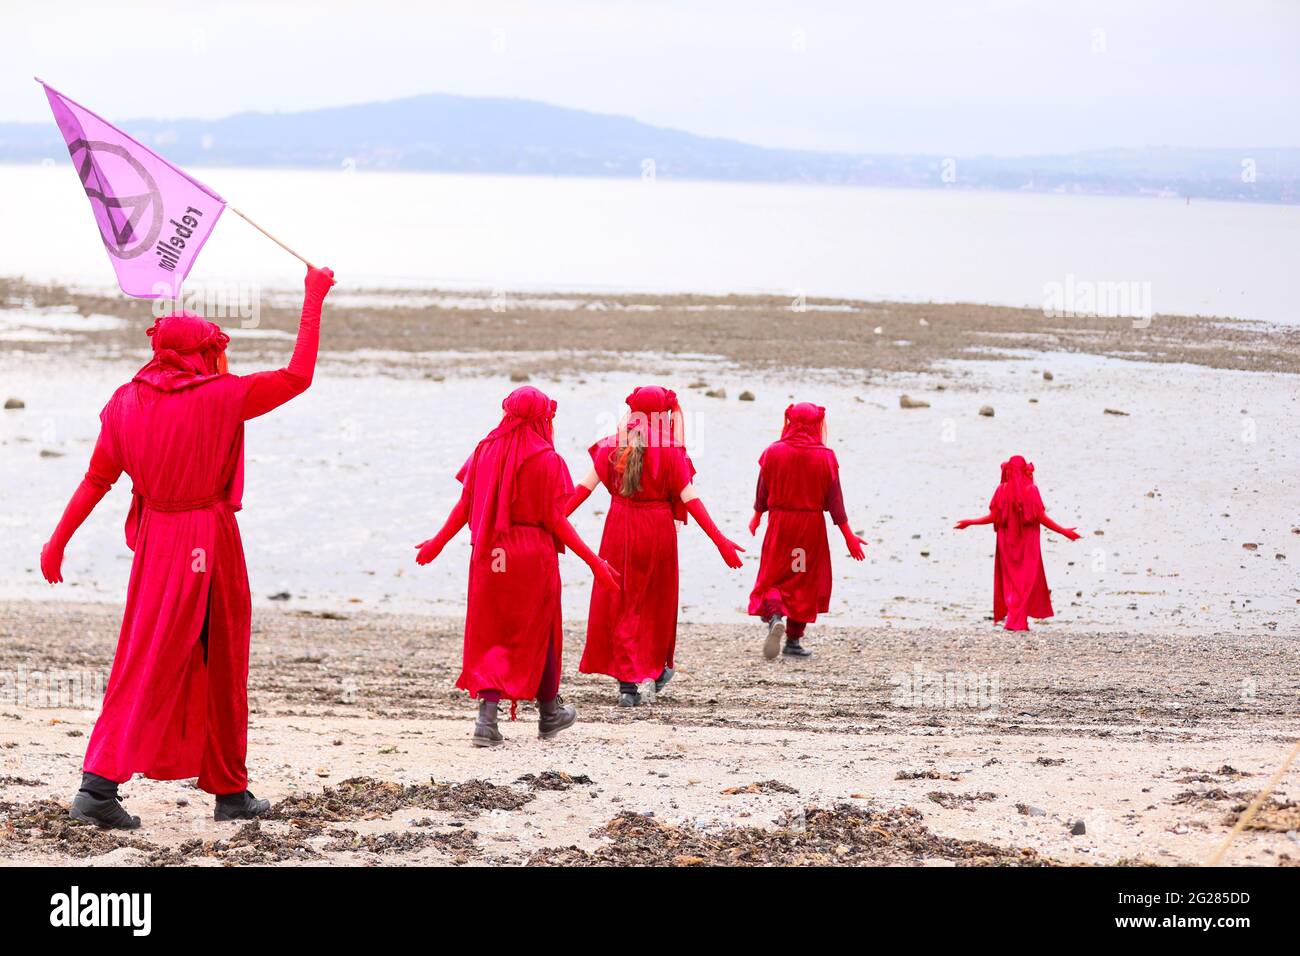 The Red Rebel Brigade hold a 'Tea in the Sea' protest in Belfast Lough at Seapark, Co. Down, ahead of the G7 summit to highlight rising sea levels. Stock Photo